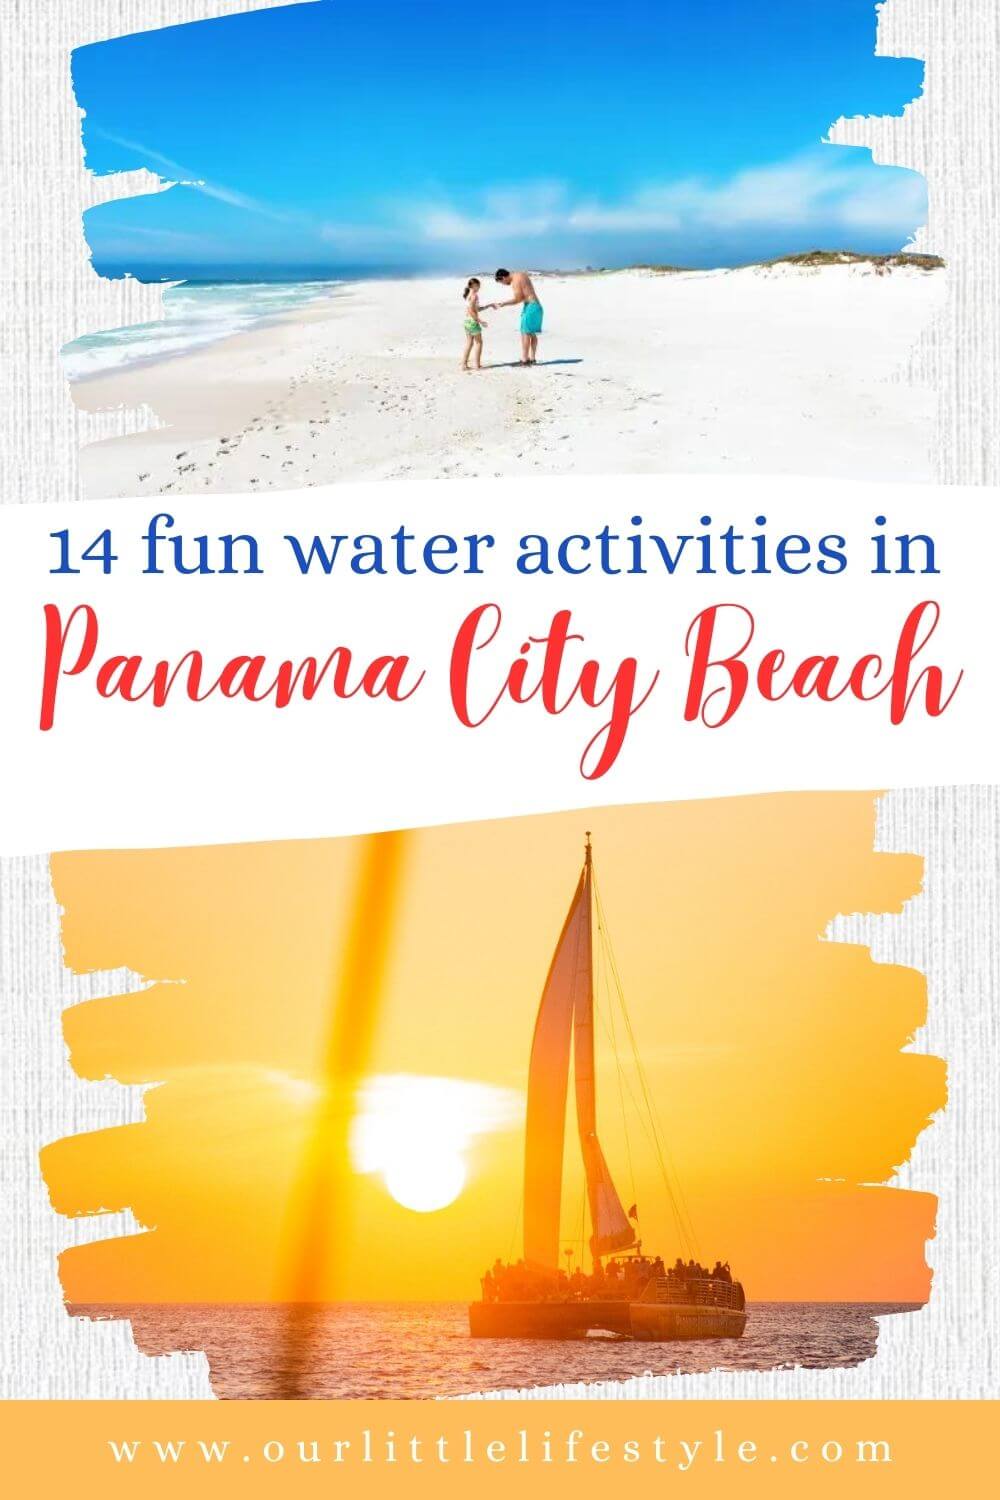 Exciting Panama City Beach Water Activities For Your Family (Family Travel Guide)